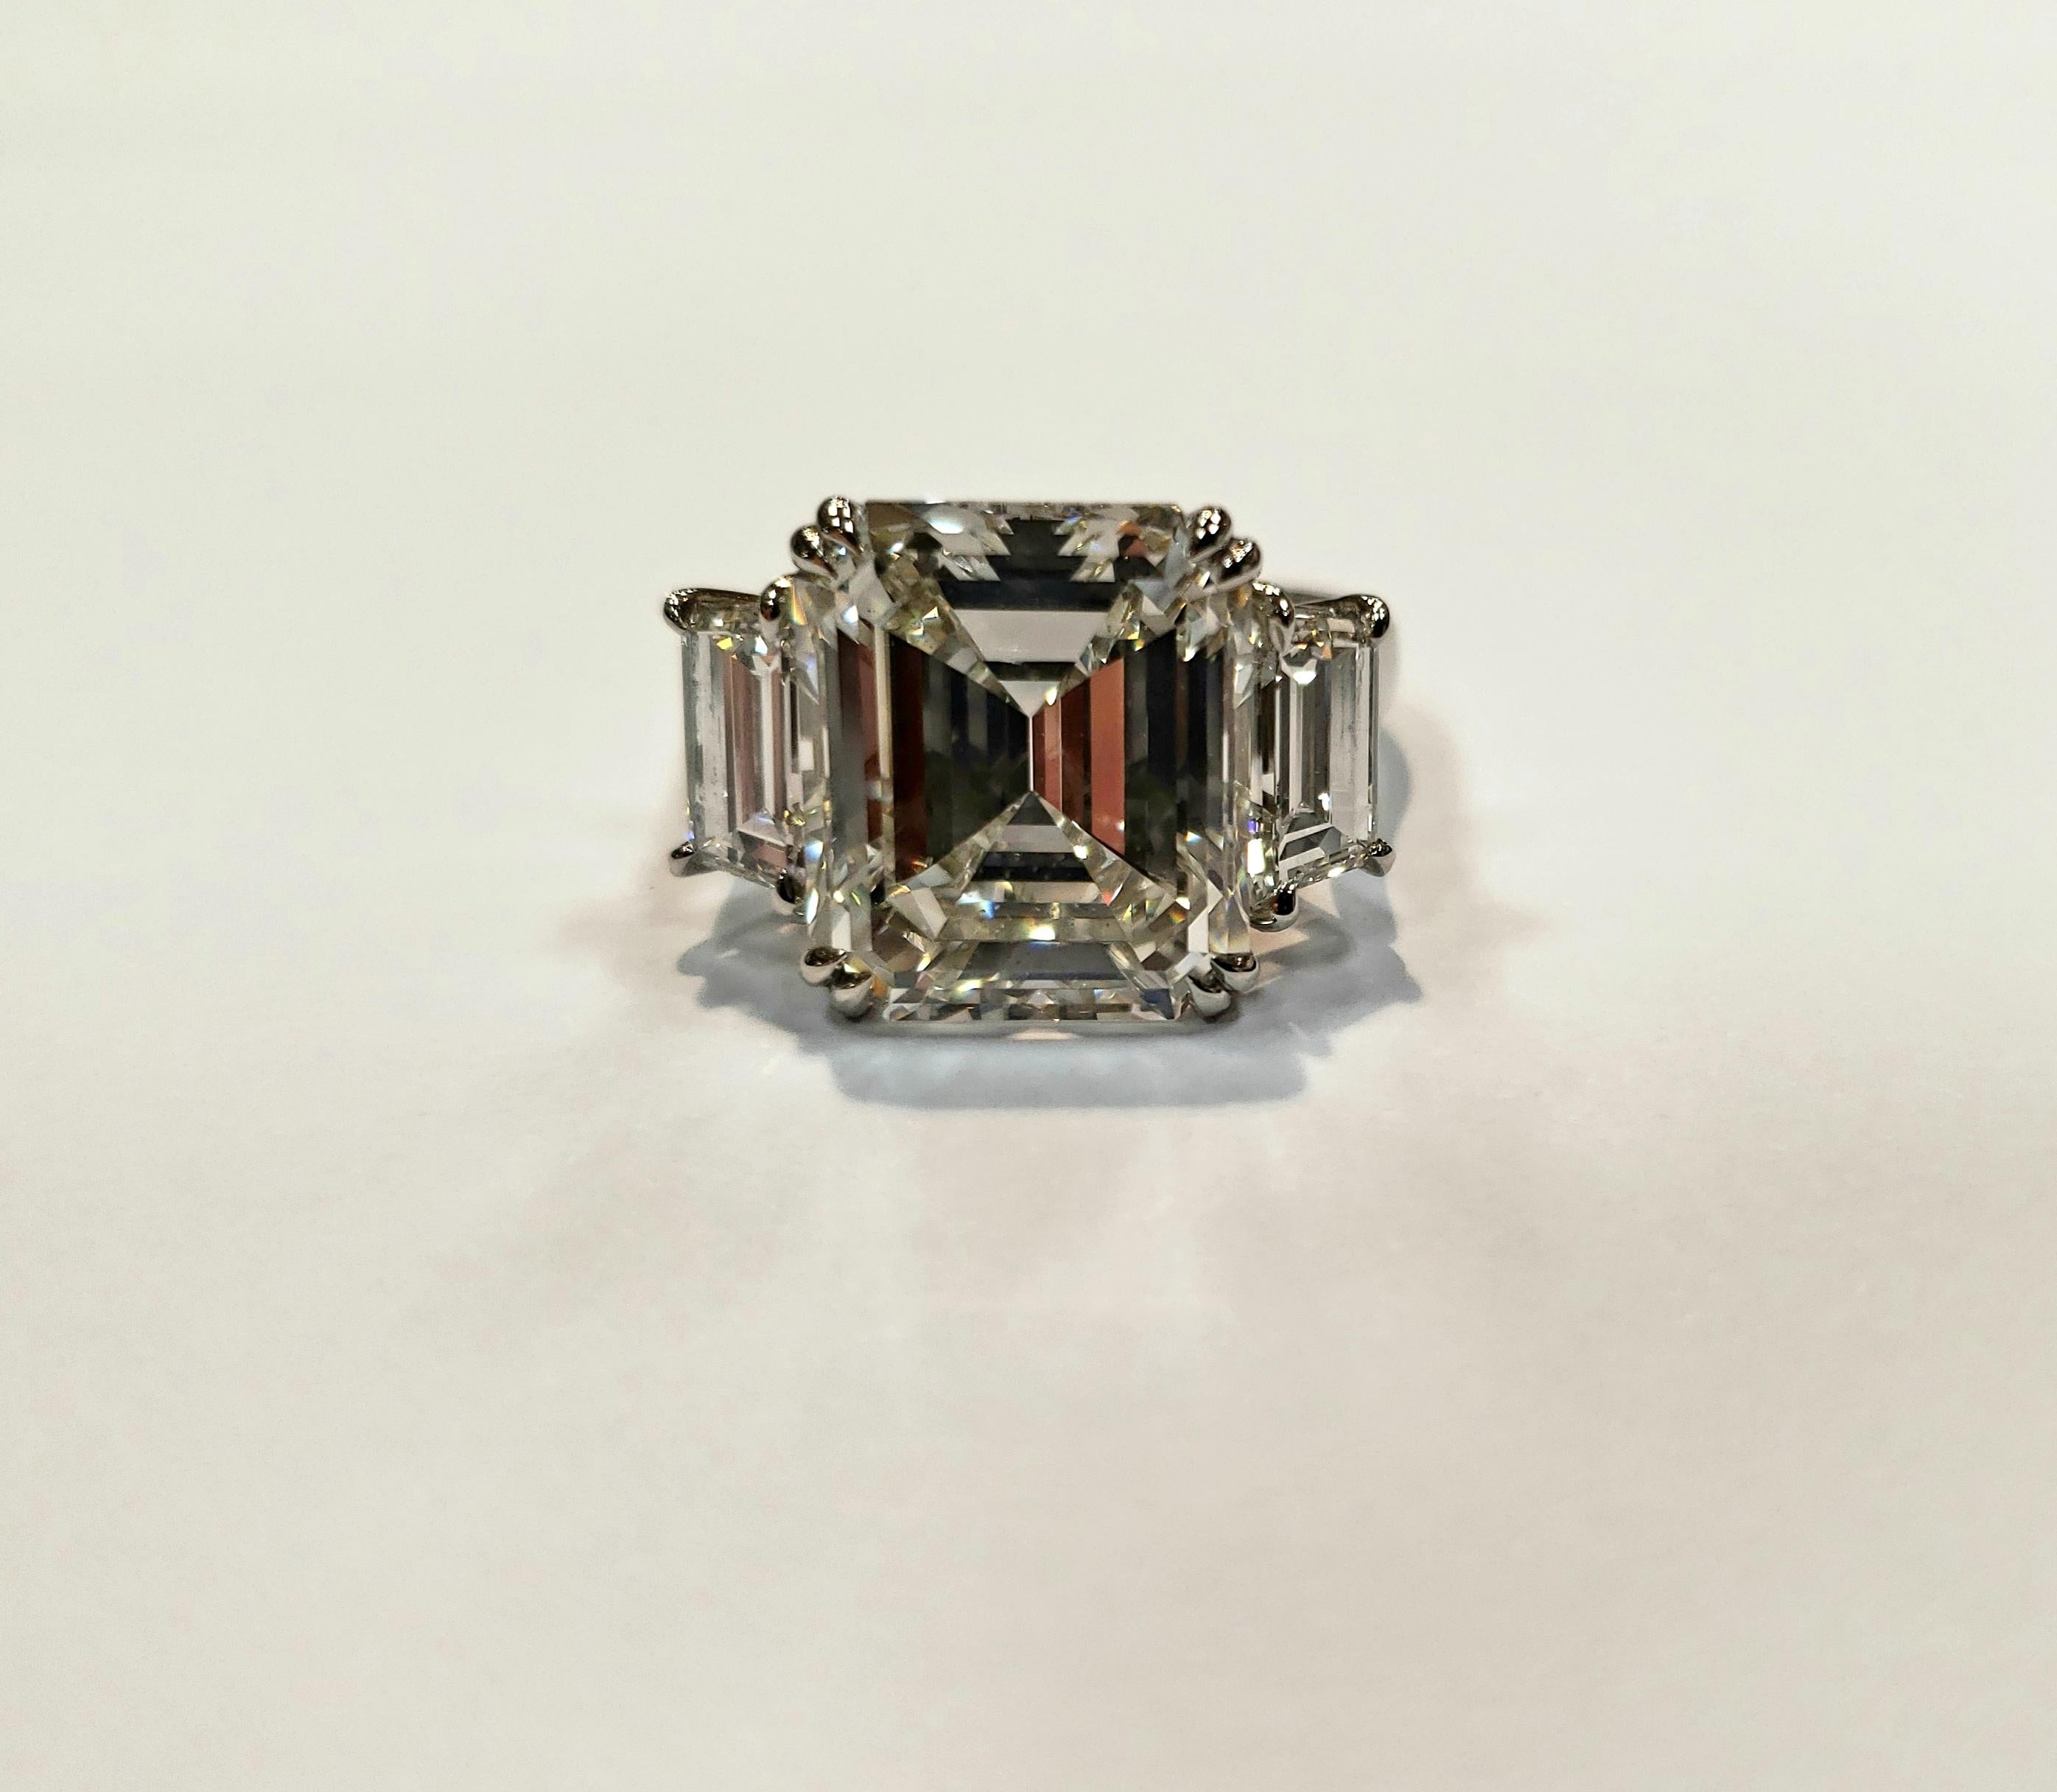 GIA Certified 10.29 Carat Emerald Cut Diamond Ring with Side Stones I/VS1 For Sale 1